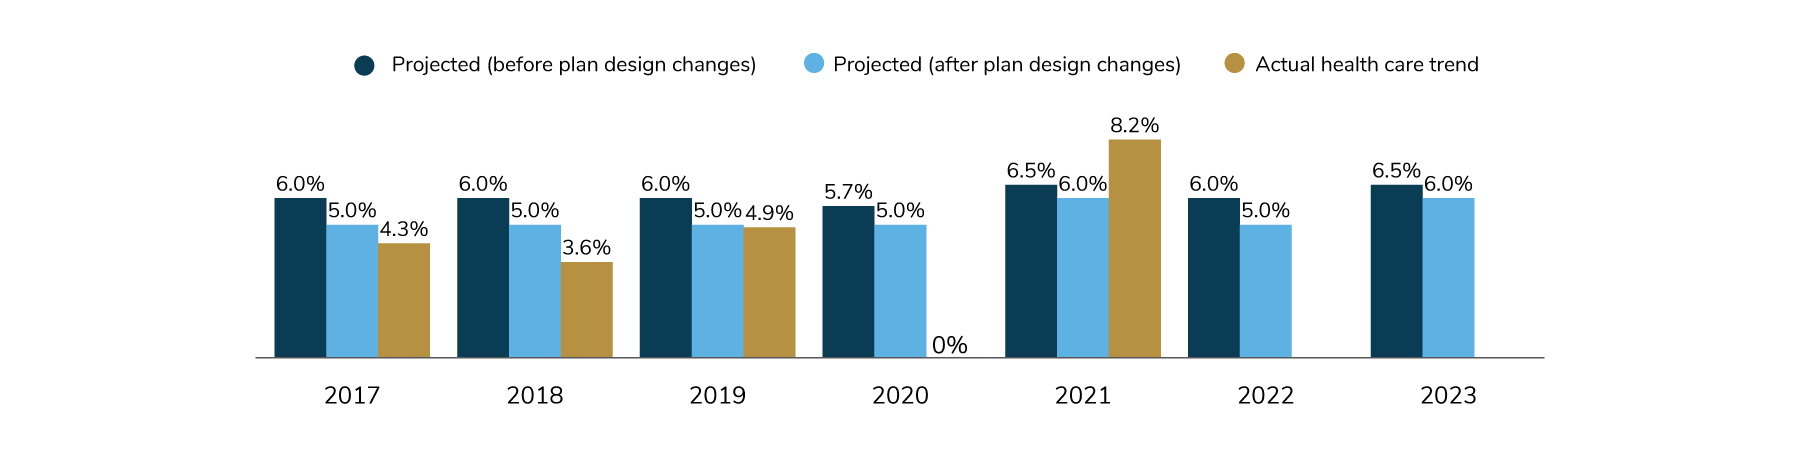 Actual health care trend increased by 8.2% in 2021, up from 0% in 2020. Projected health care trend (after plan design changes) is 5% for 2022 and 6% for 2023.